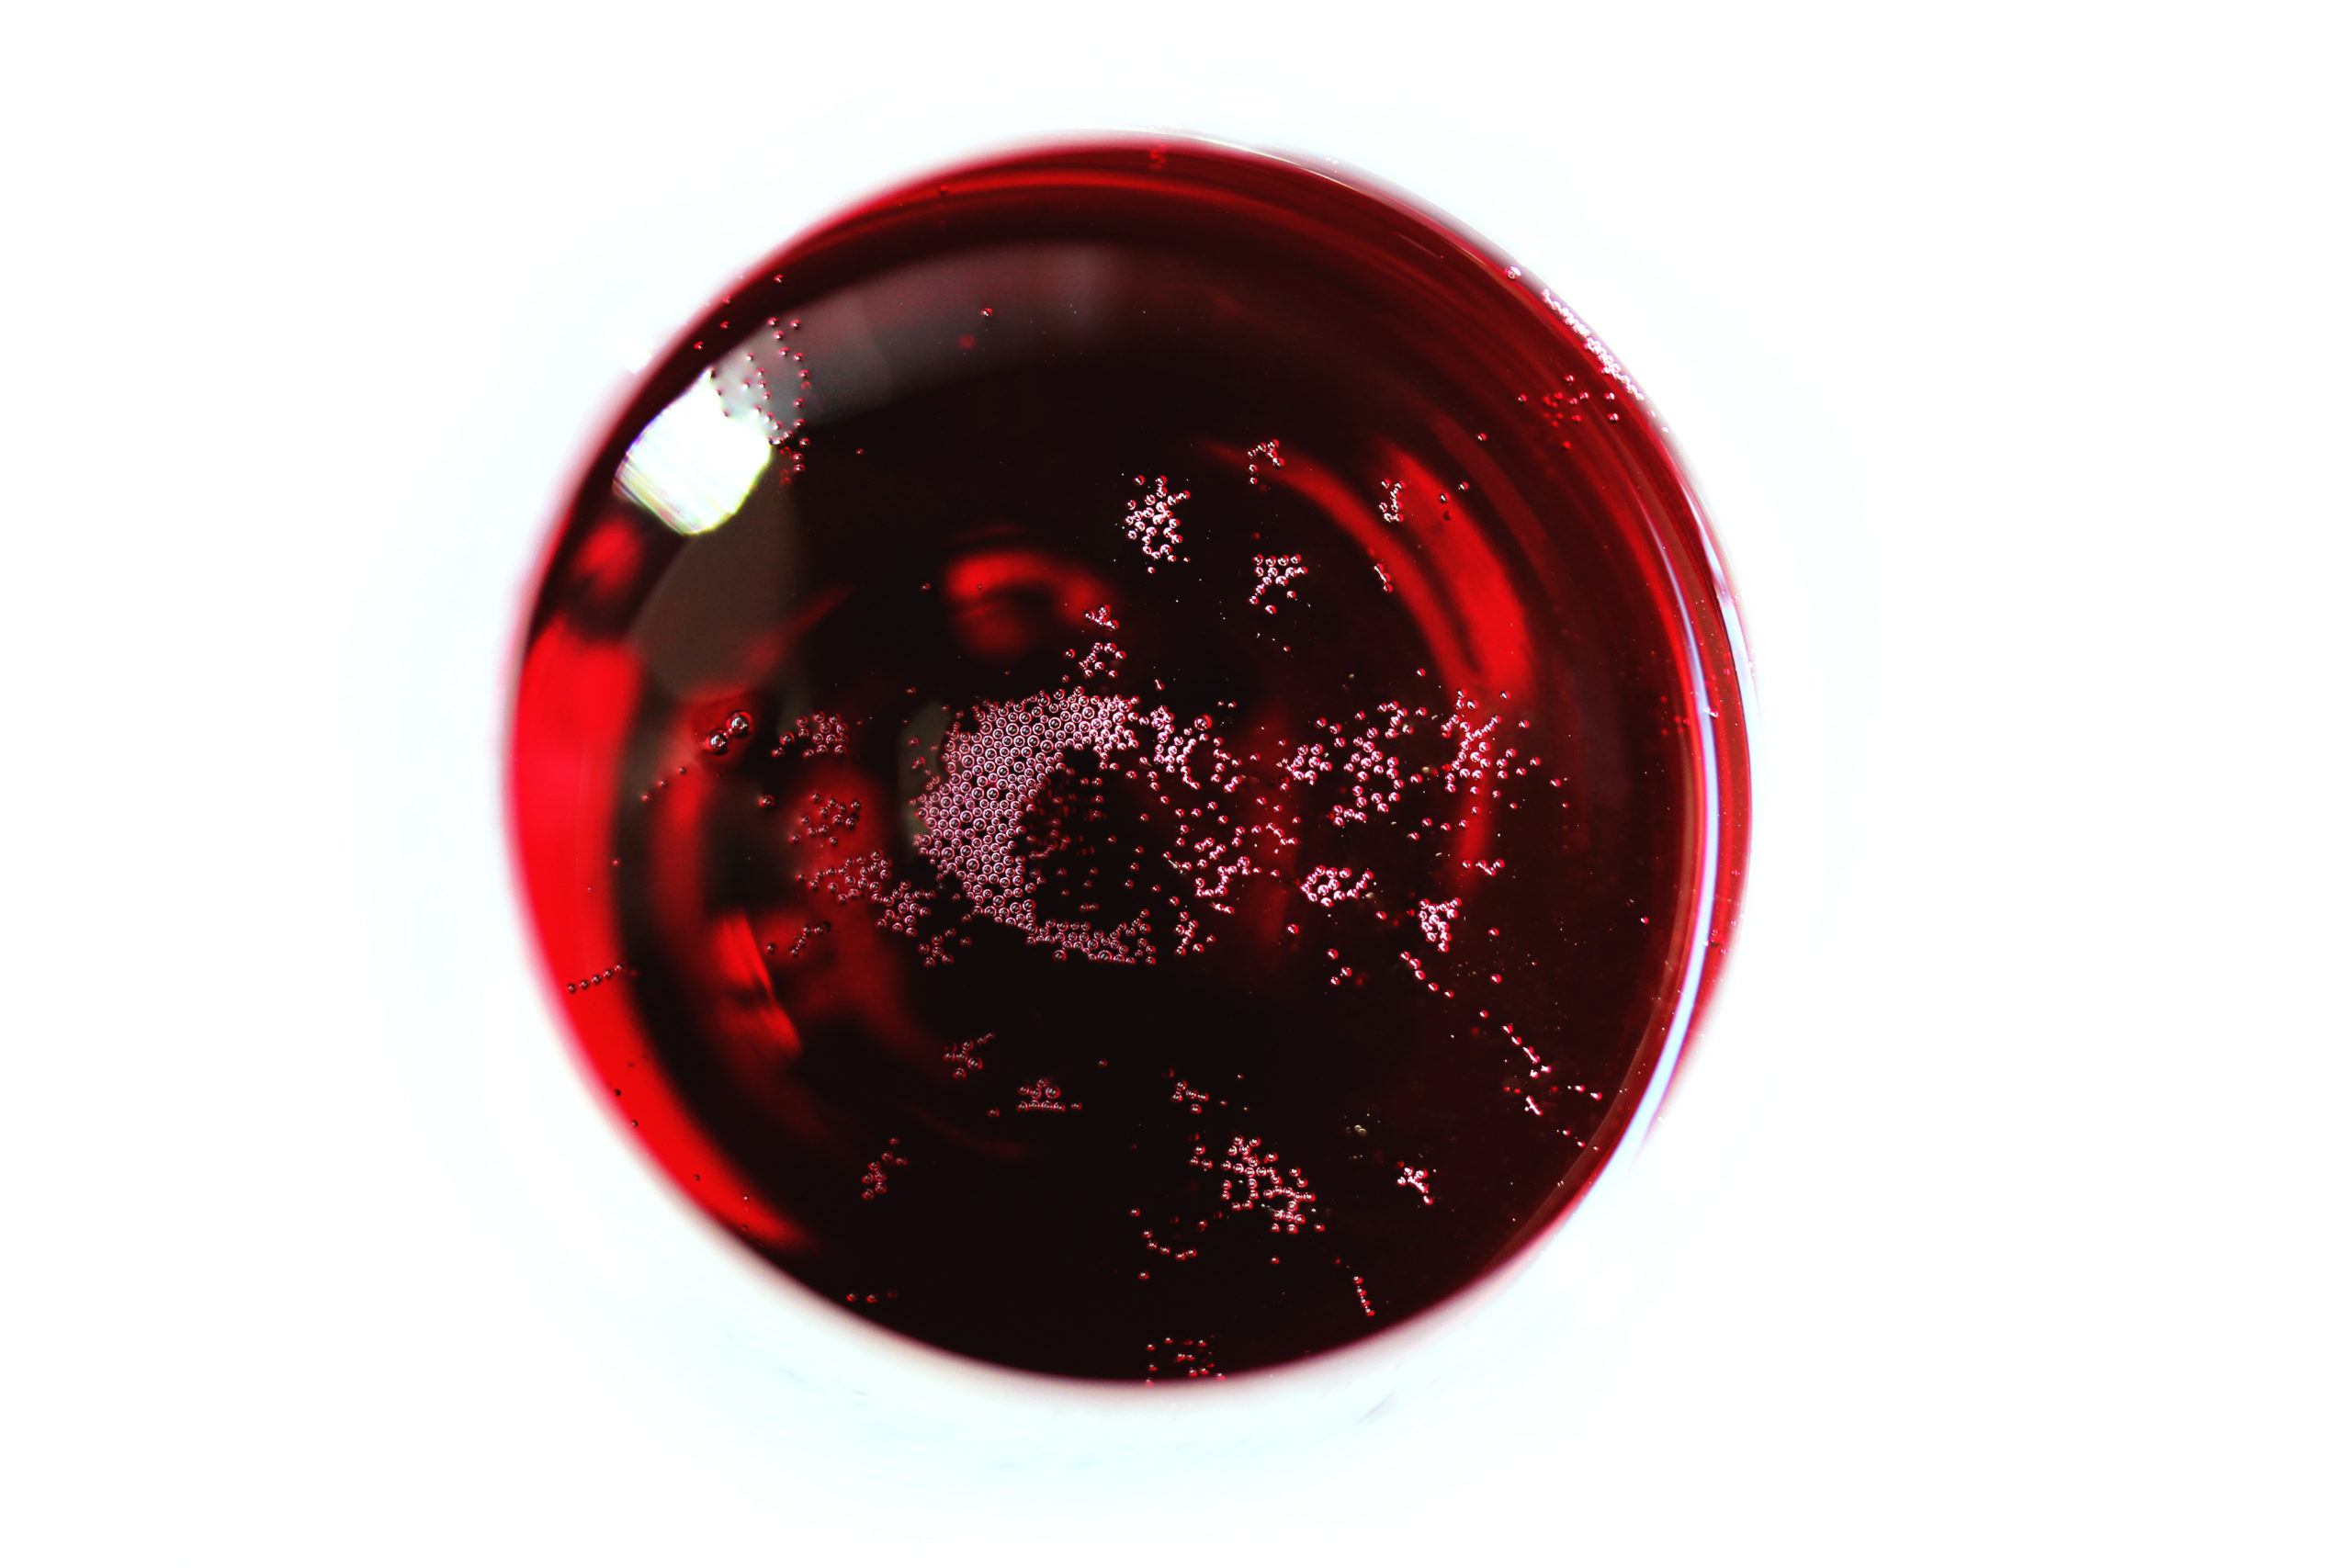 Red Lambrusco wine glass viewed from above